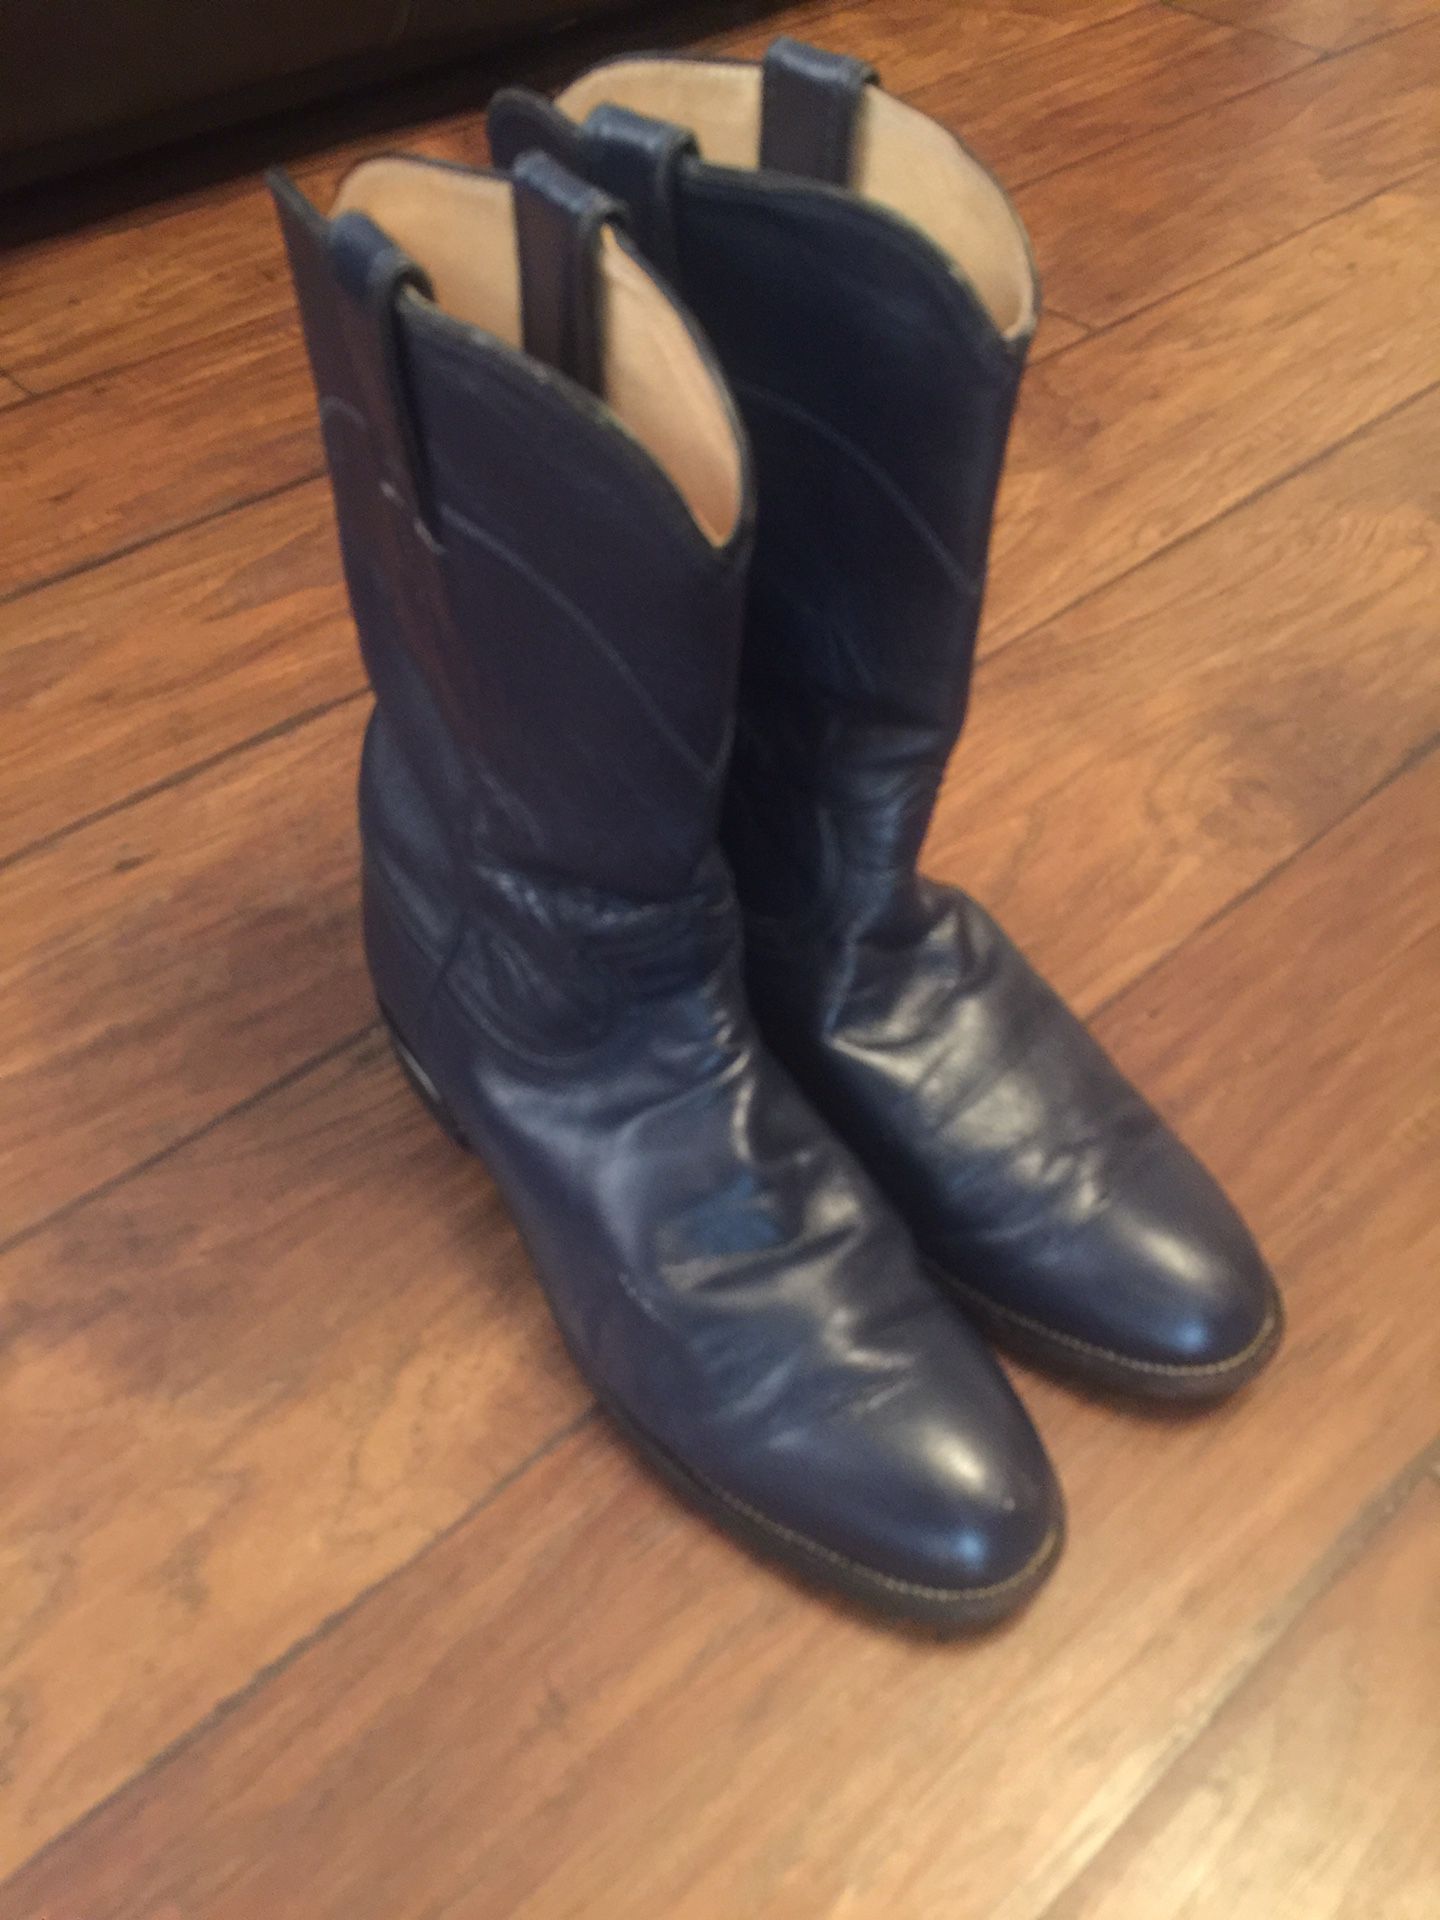 Ladies Justin all leather boots. Made in USA. Size 8b